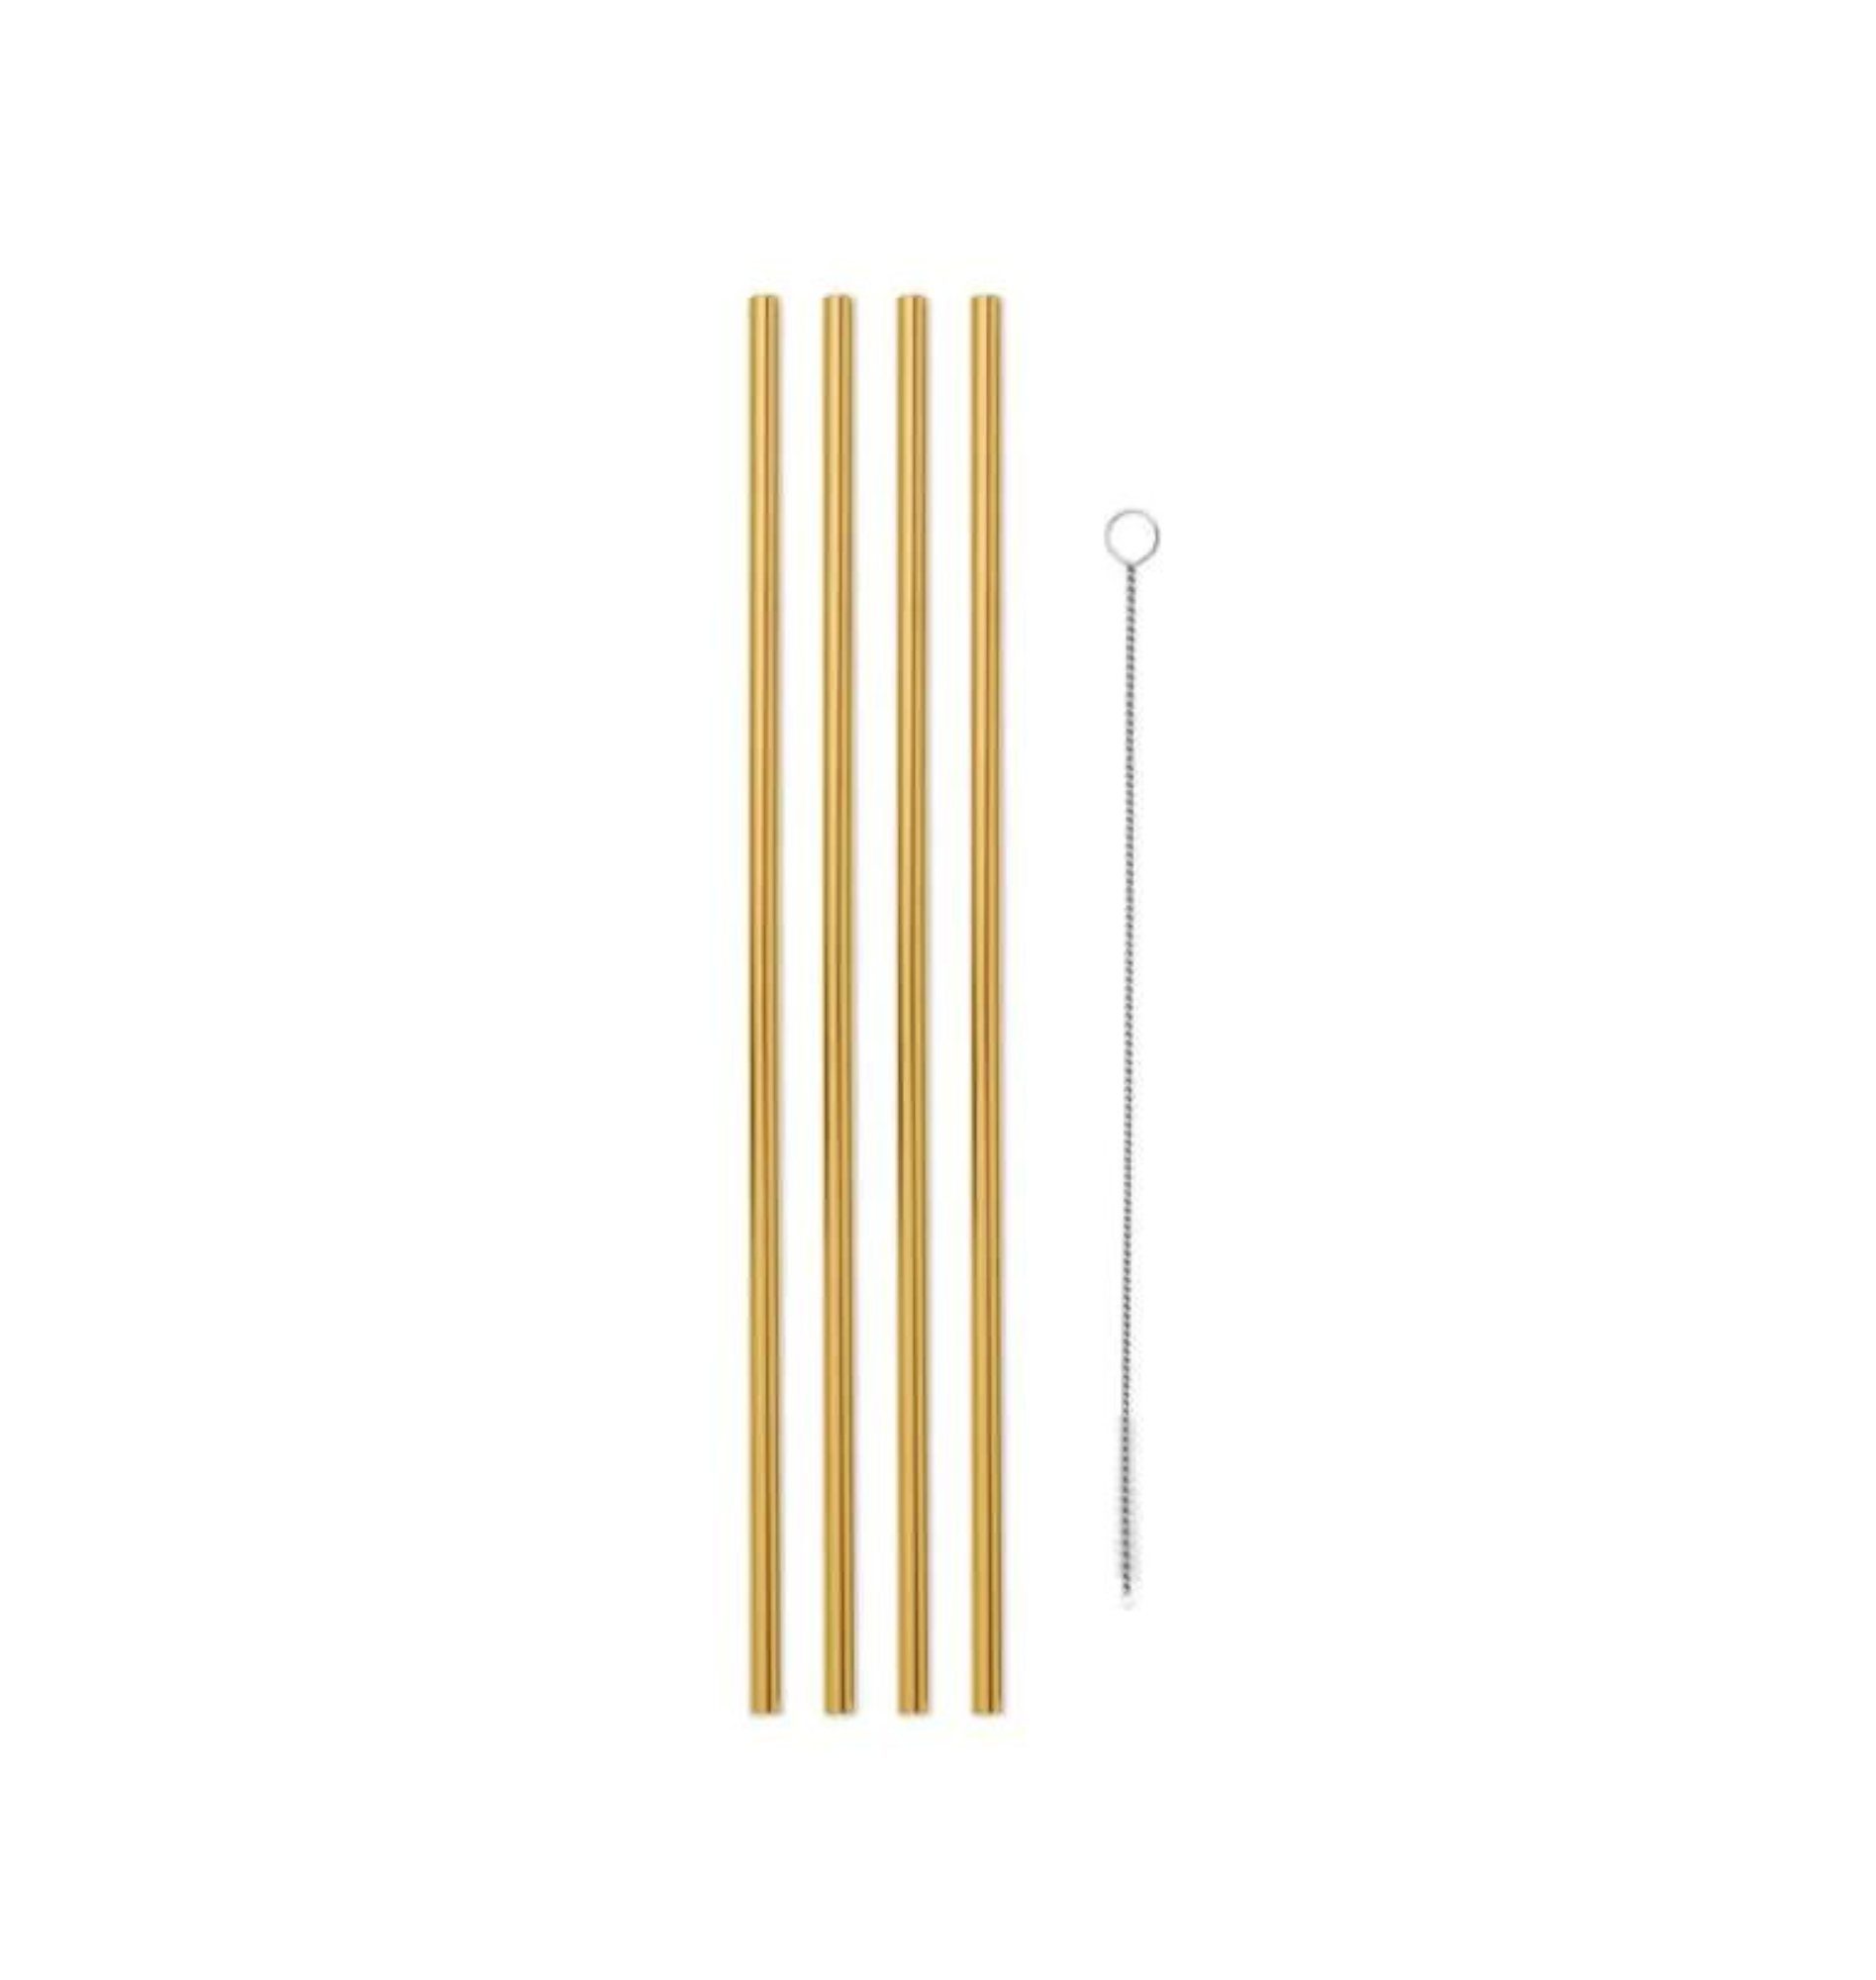 Porter 10in Metal Straws, Set of 4 with Cleaner